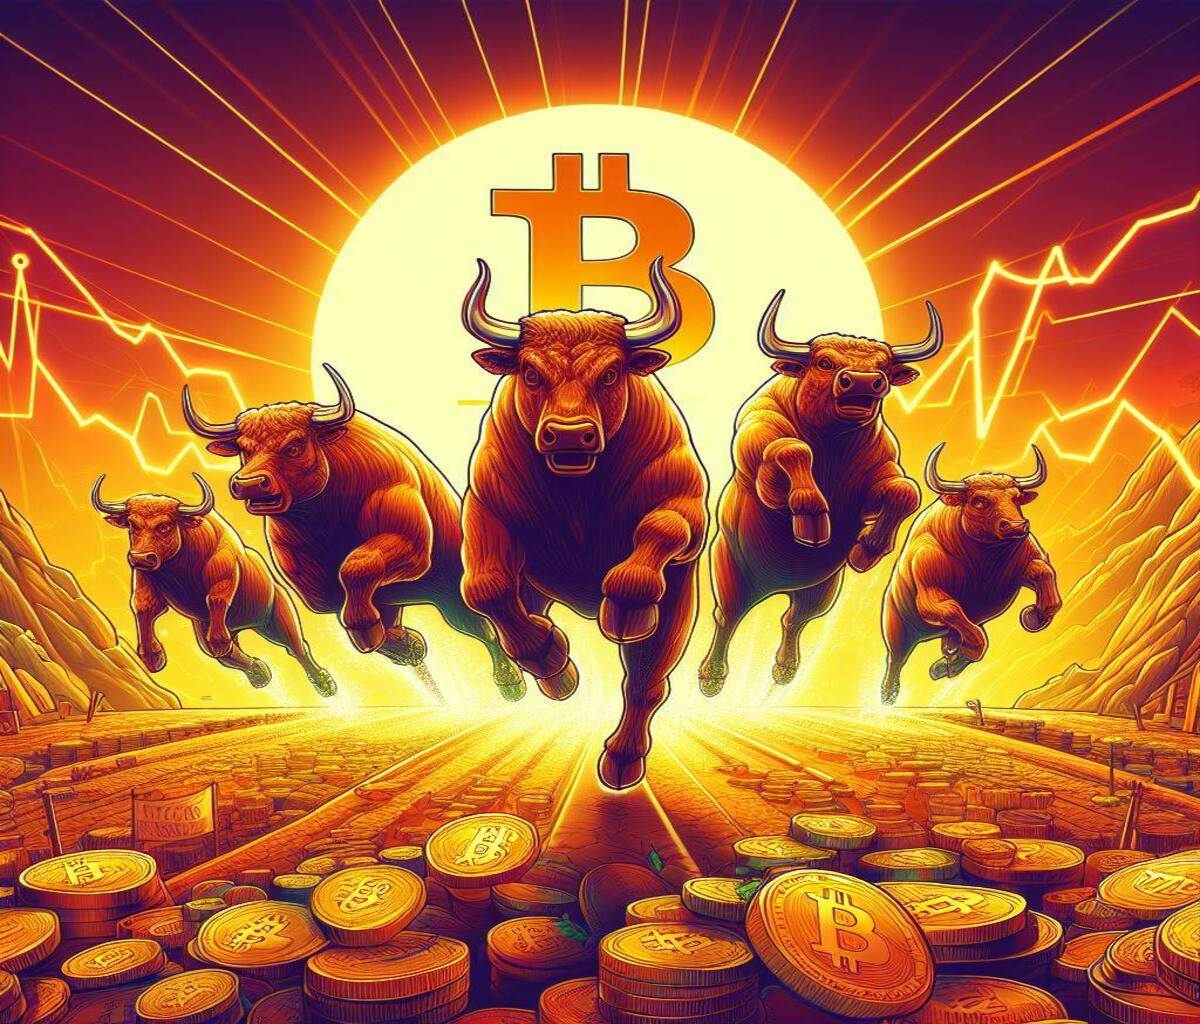 Bitcoin Soars: ETF Volumes Hit 7-Month Highs as Institutions Pour $5.65 Billion In – Can BTC Crack $67k Resistance?